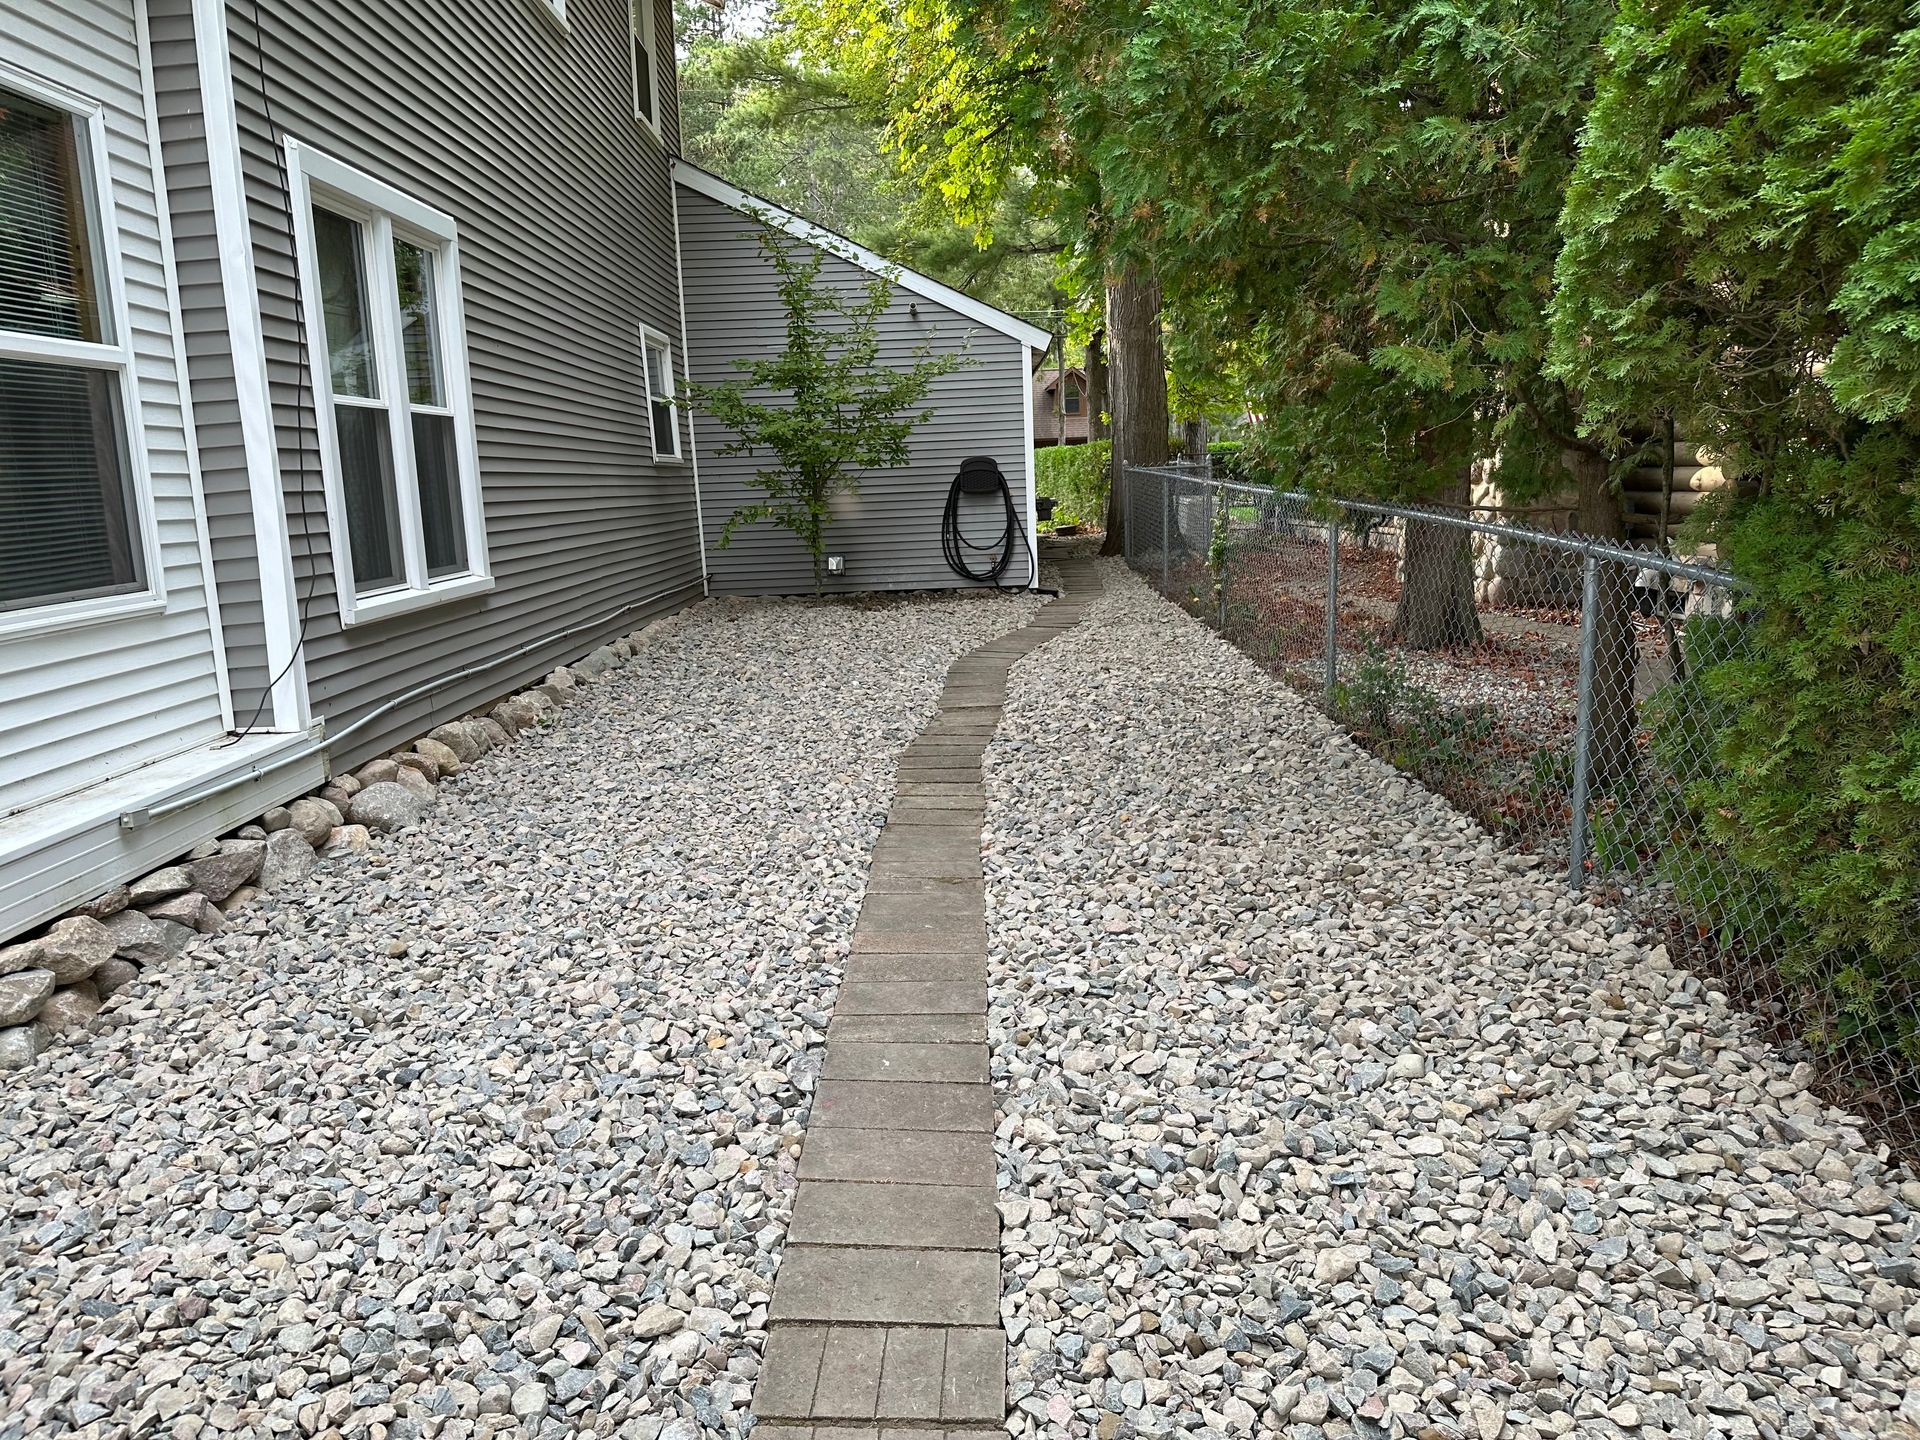 a gravel path leading to a house with a chain link fence .